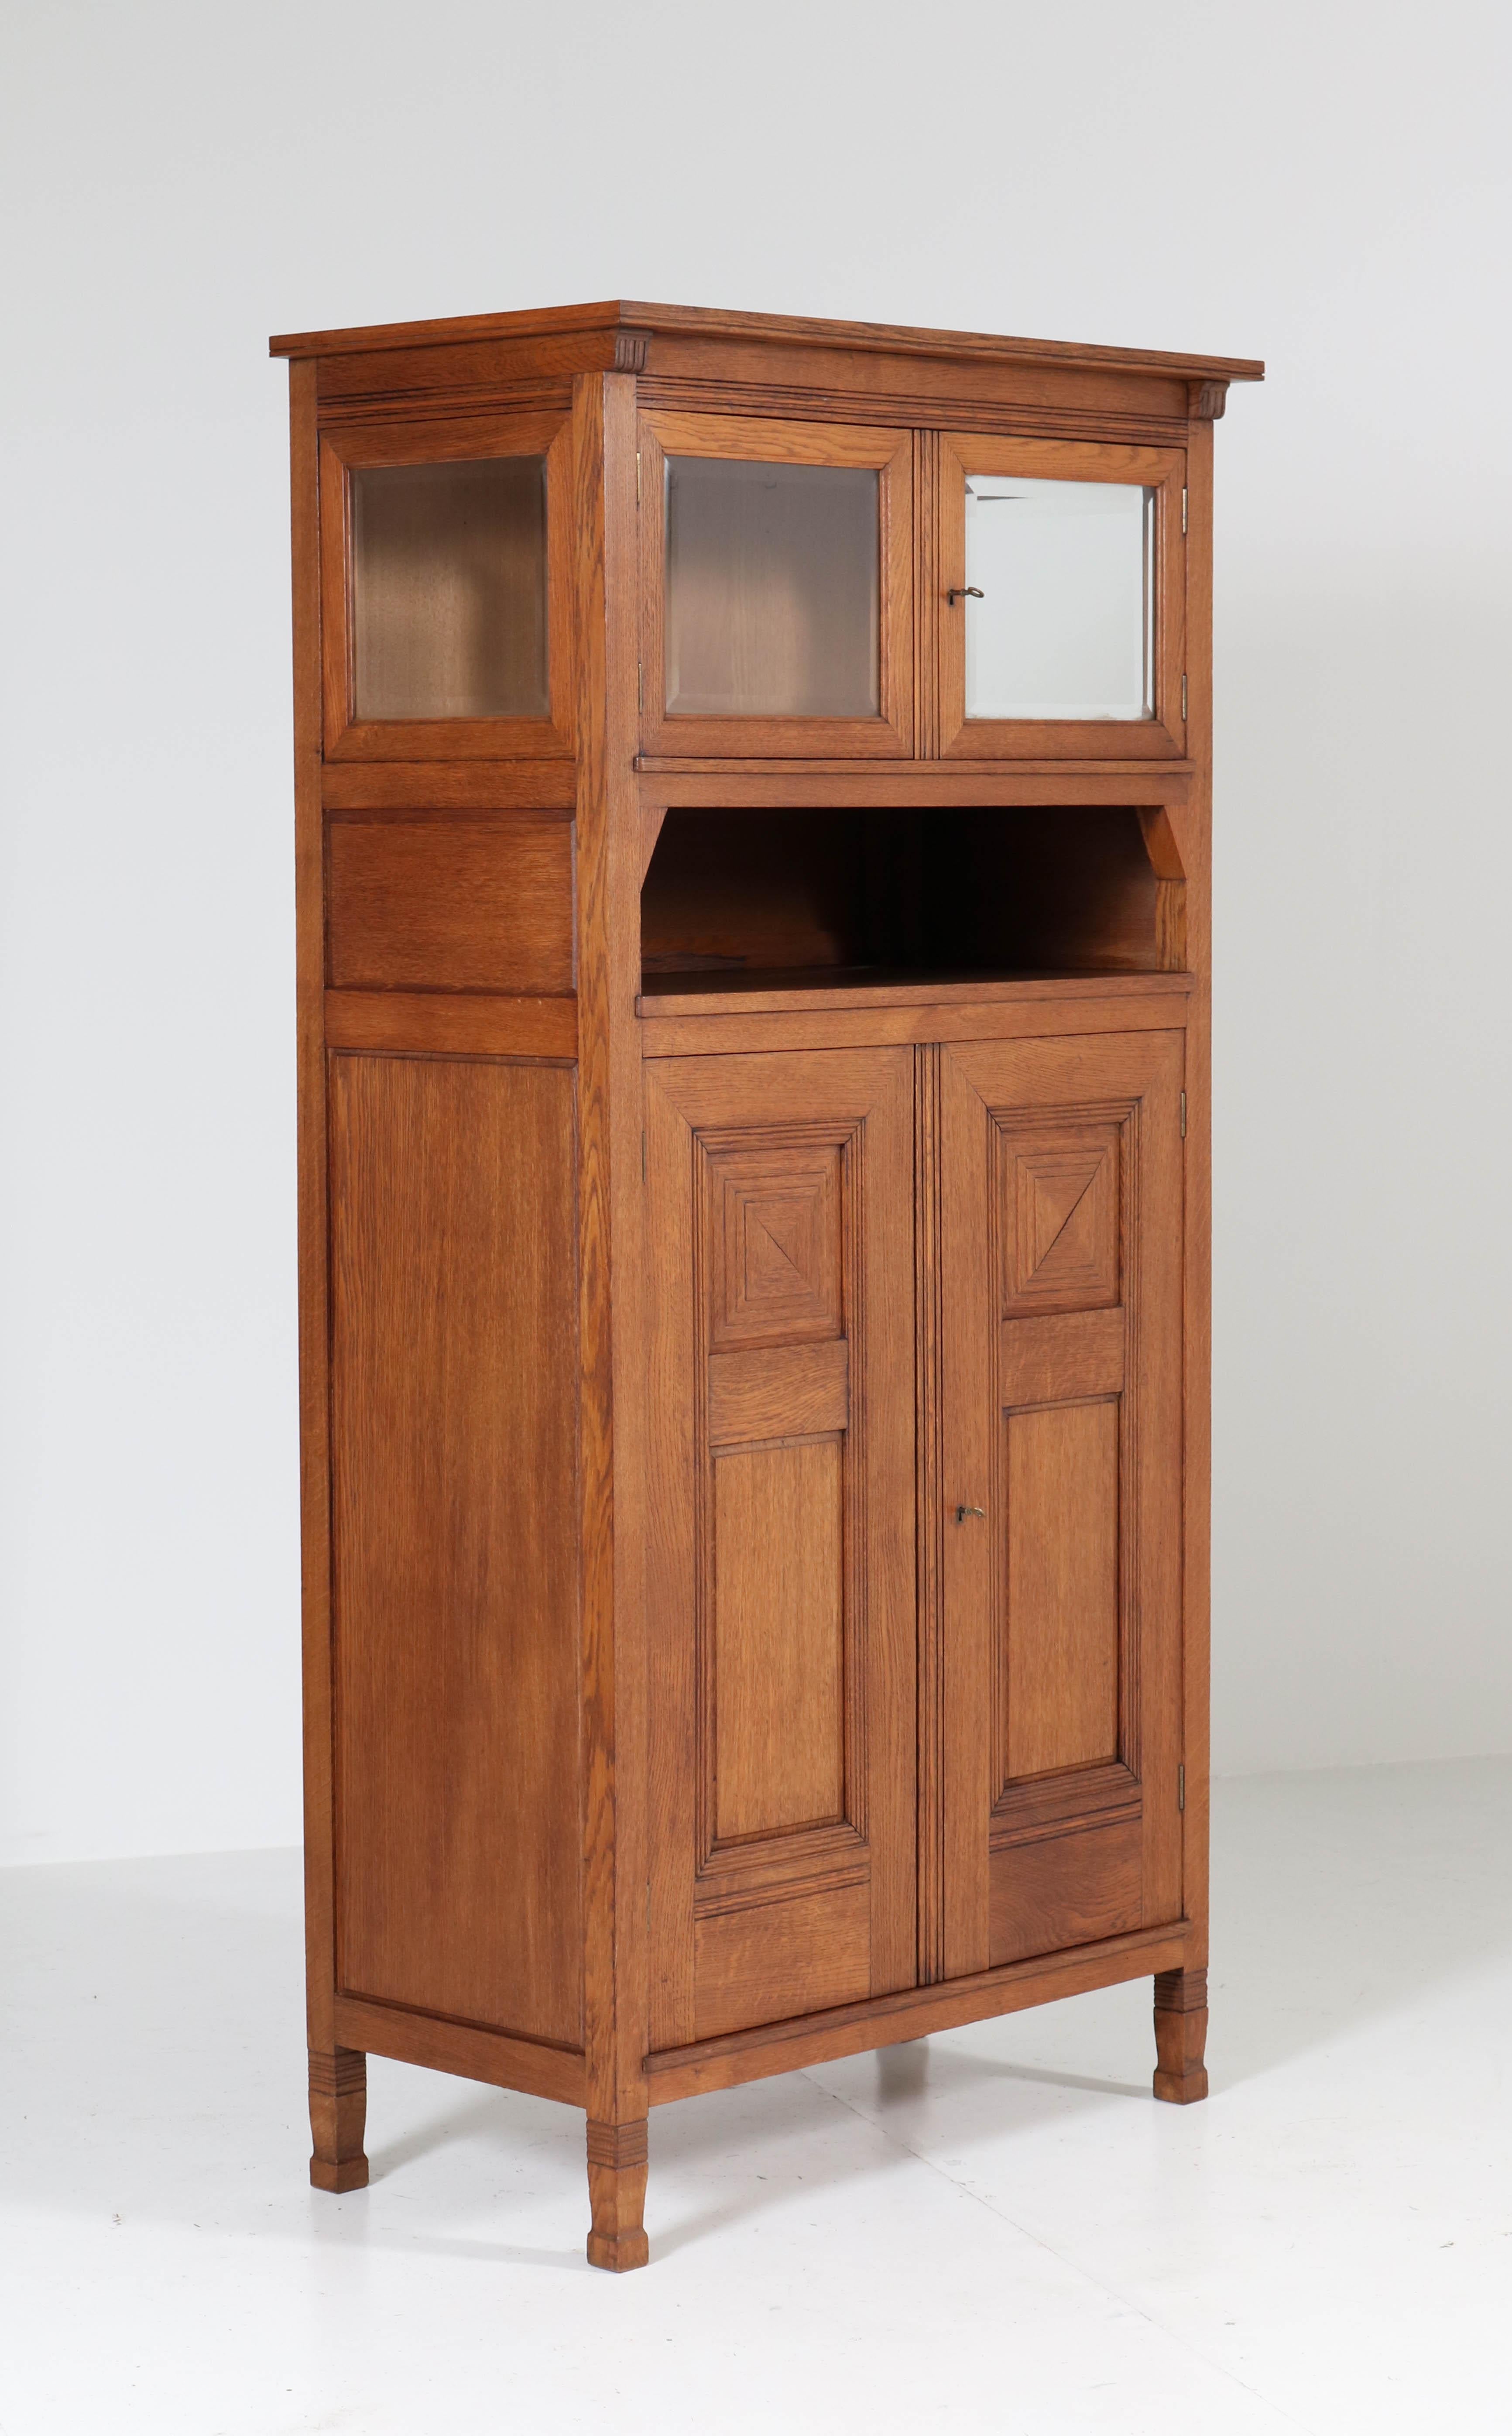 Beveled Oak Art Nouveau Arts & Crafts Bookcase by A.R. Wittop Koning for J.A. Huizinga